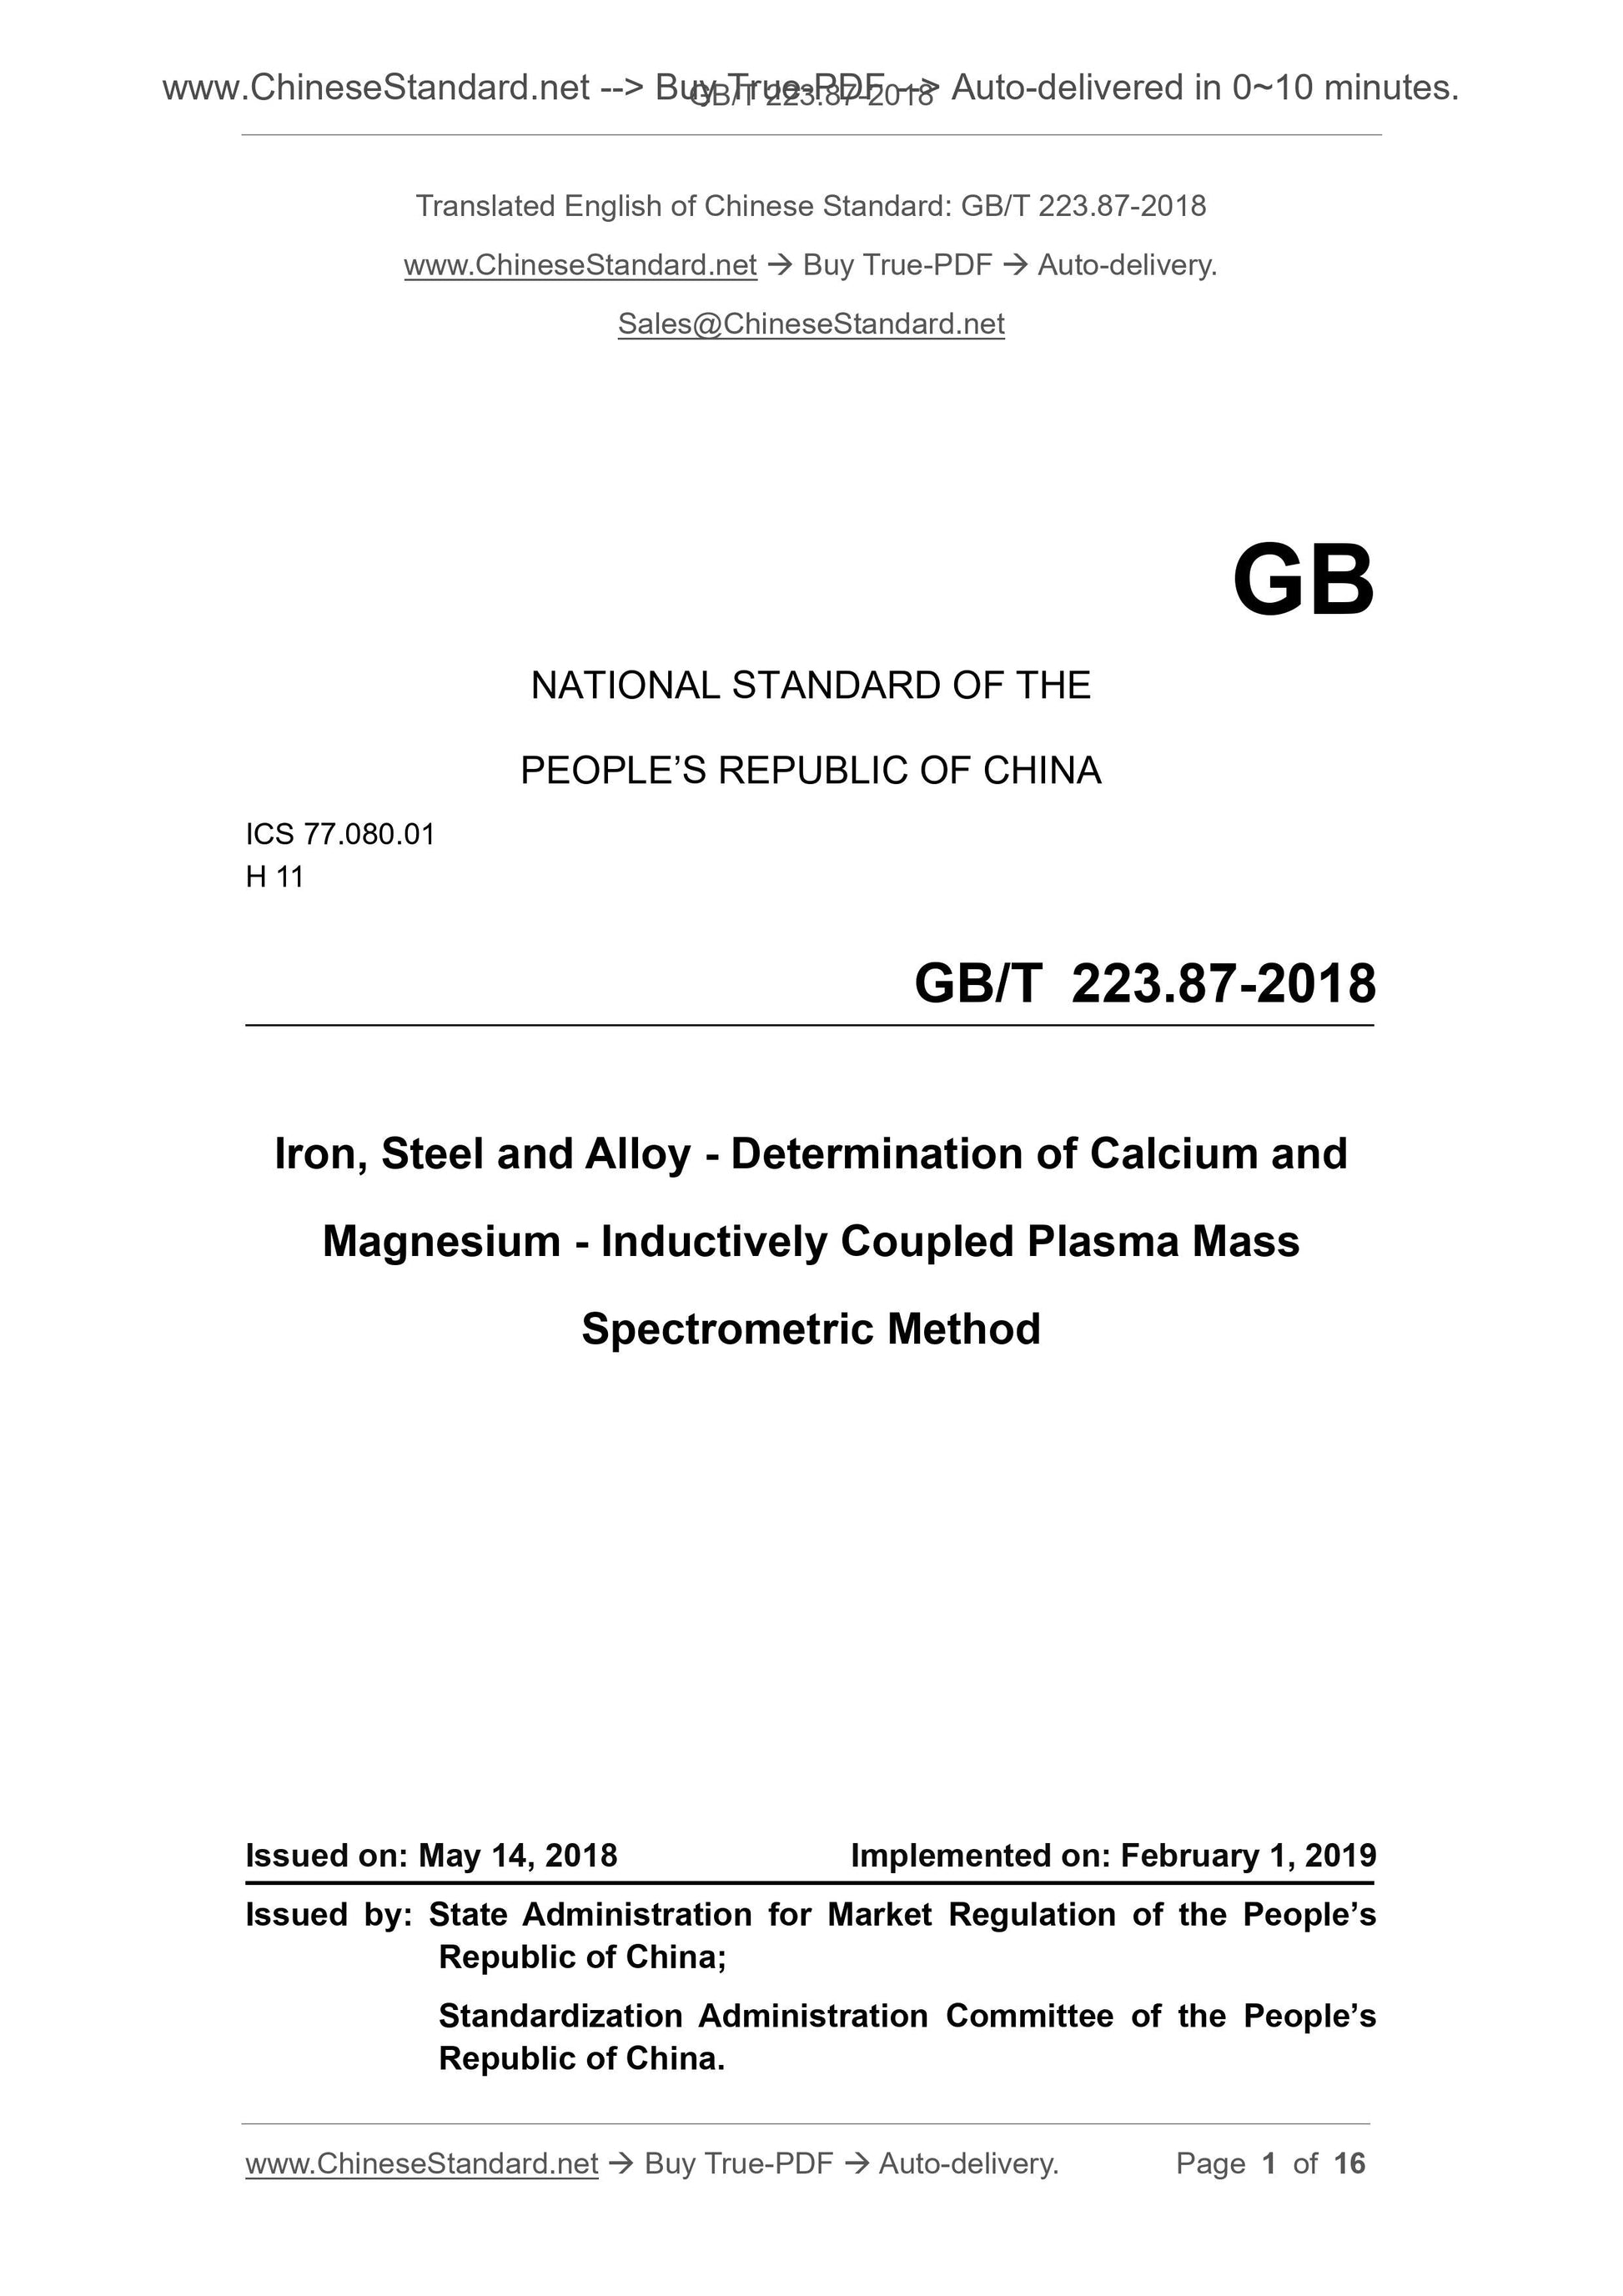 GB/T 223.87-2018 Page 1